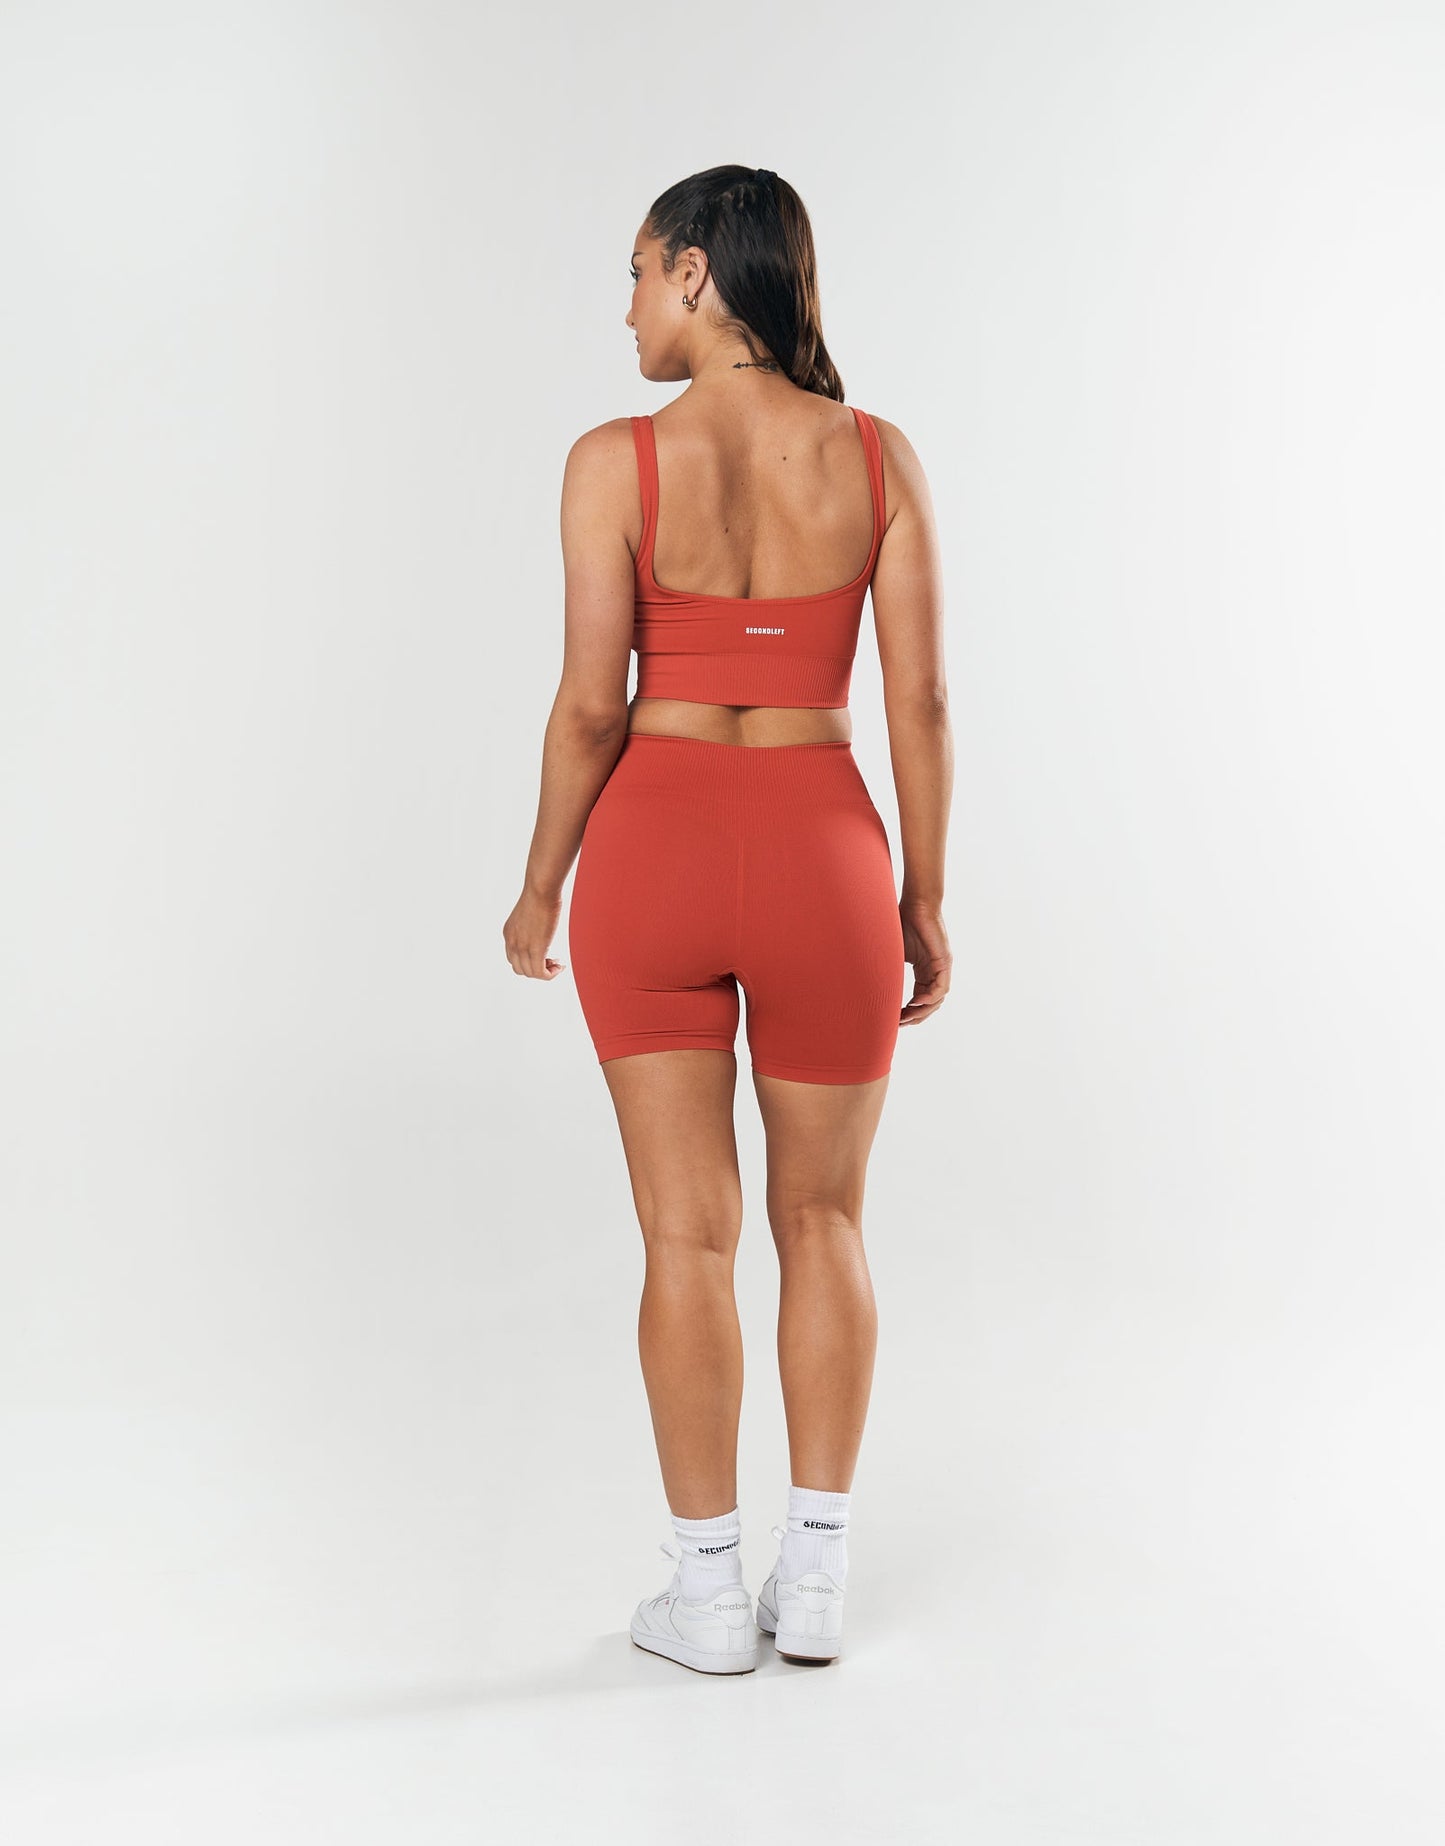 Seamless Low back Crop - Red